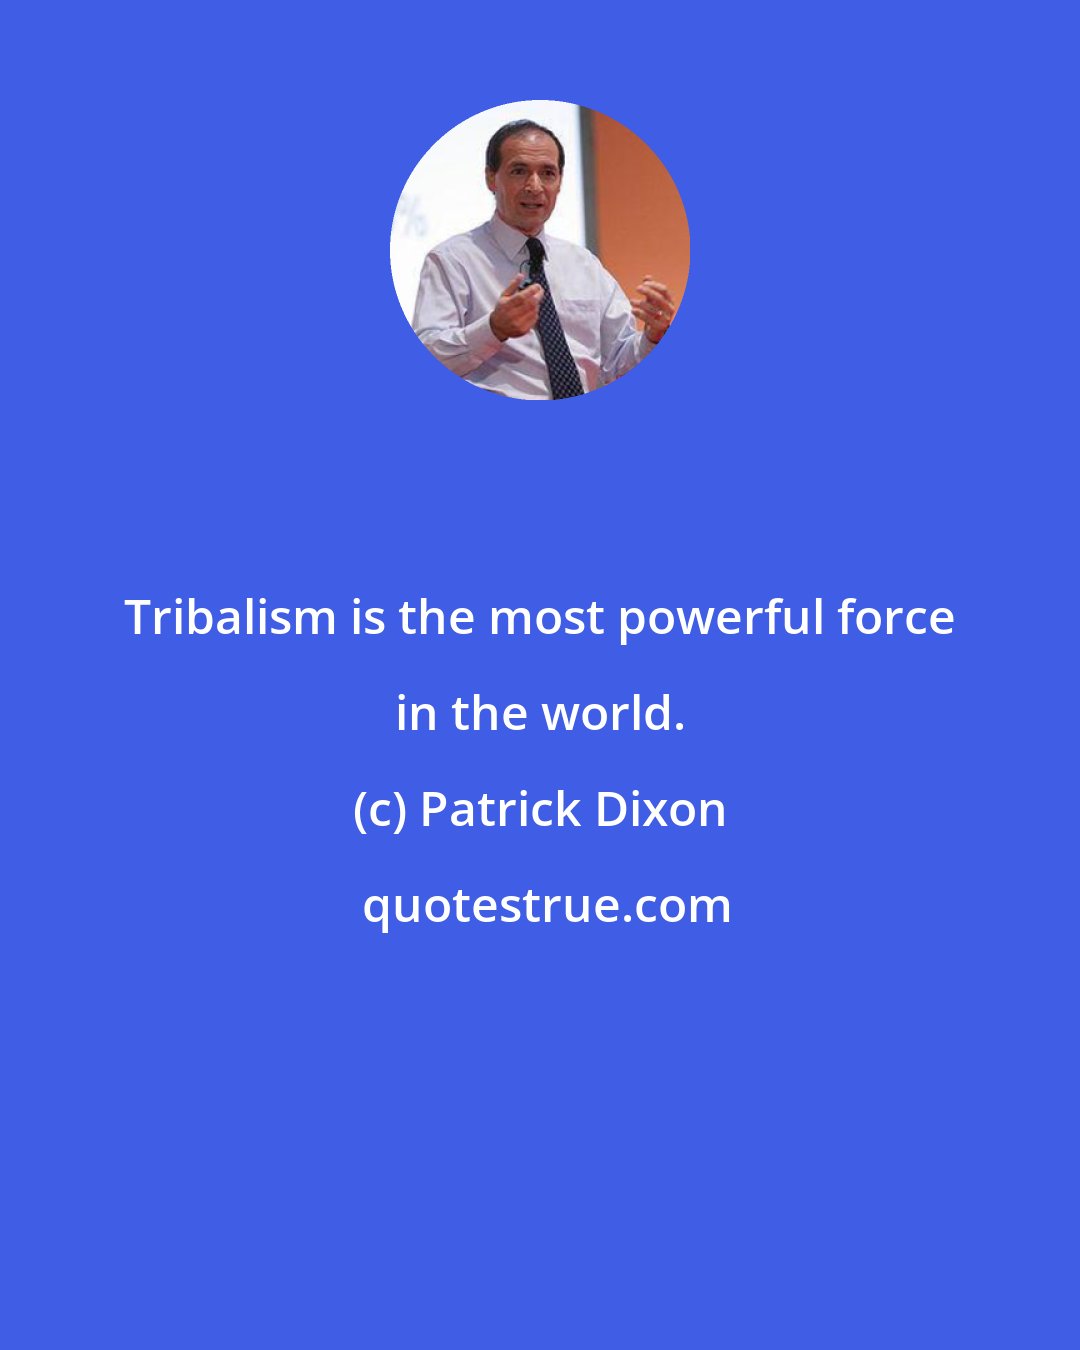 Patrick Dixon: Tribalism is the most powerful force in the world.